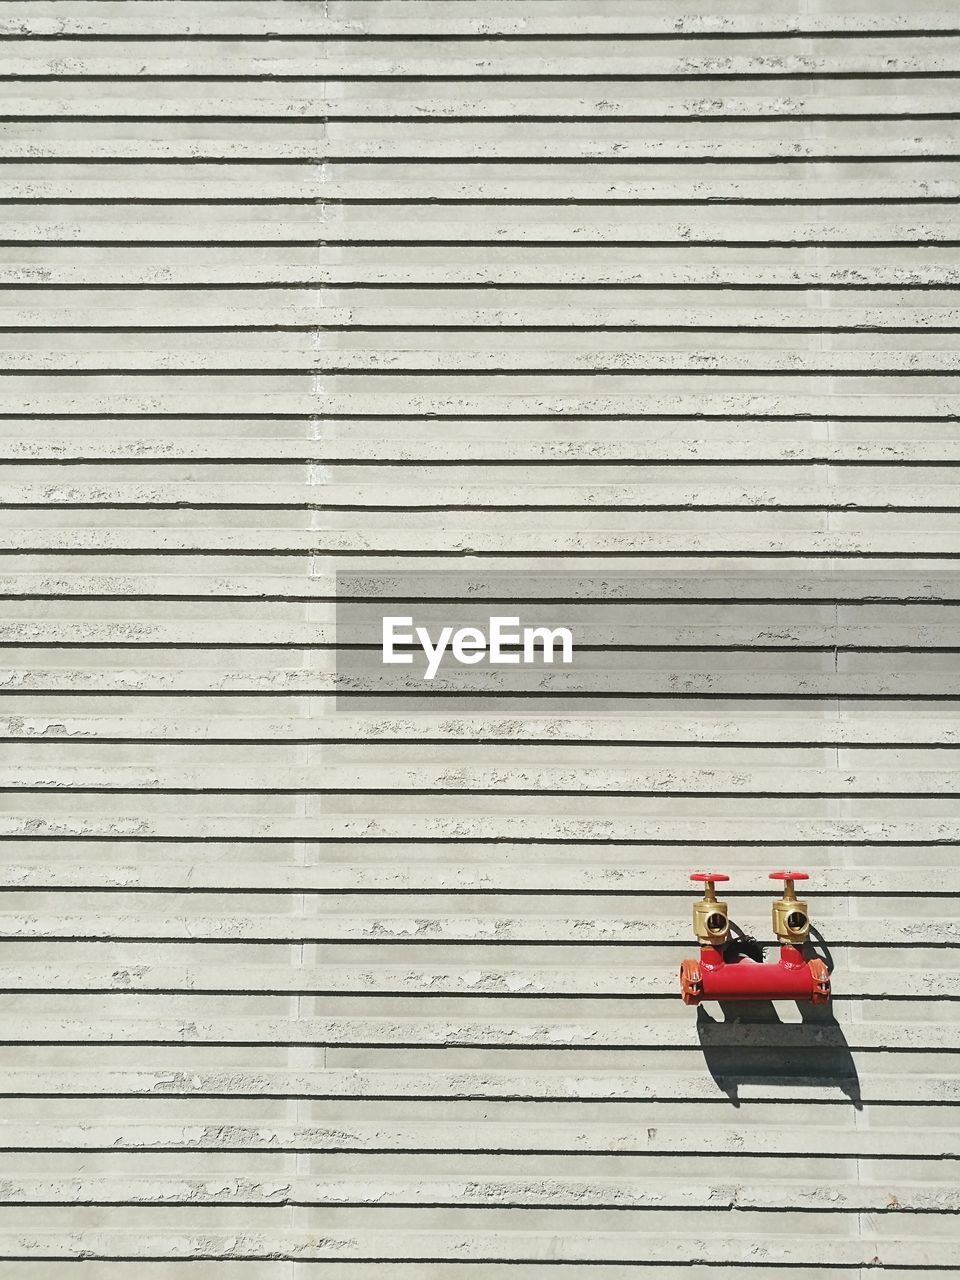 Fire hydrants mounted on wall